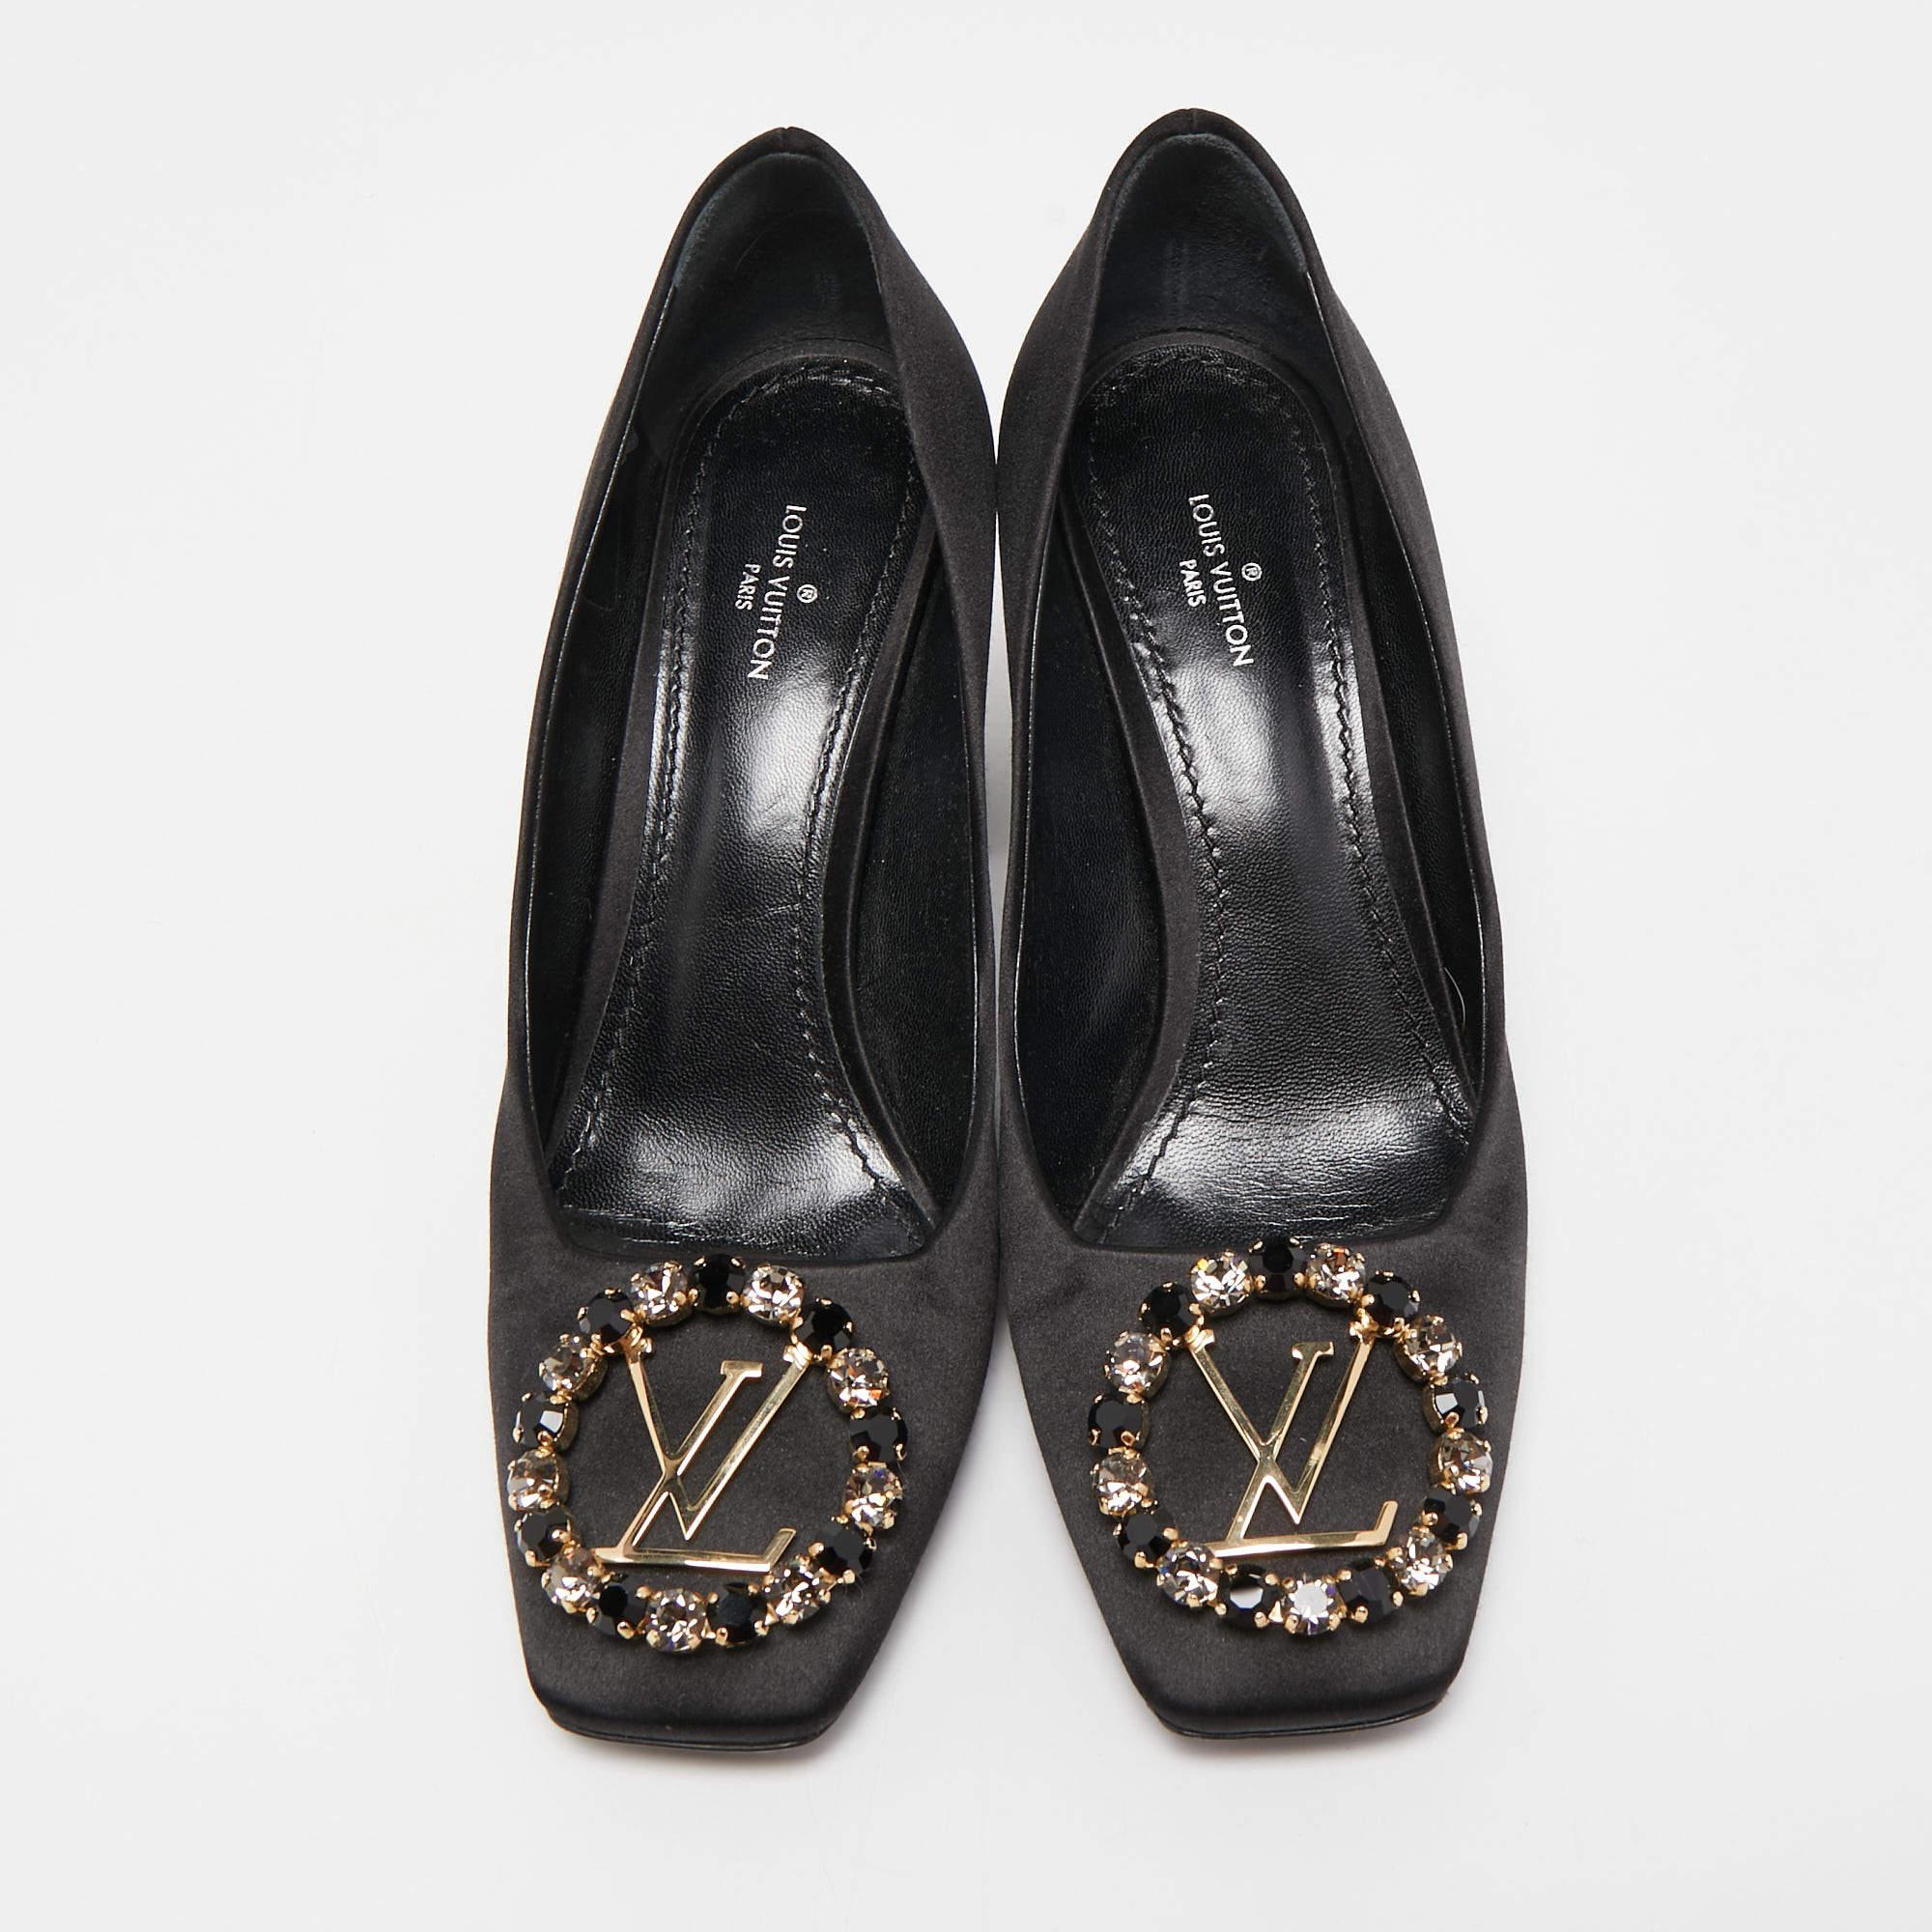 Complement your well-put-together outfit with these shoes by Louis Vuitton. Minimal and classy, they have an amazing construction for enduring quality and comfortable fit.

Includes: Original Dustbag
